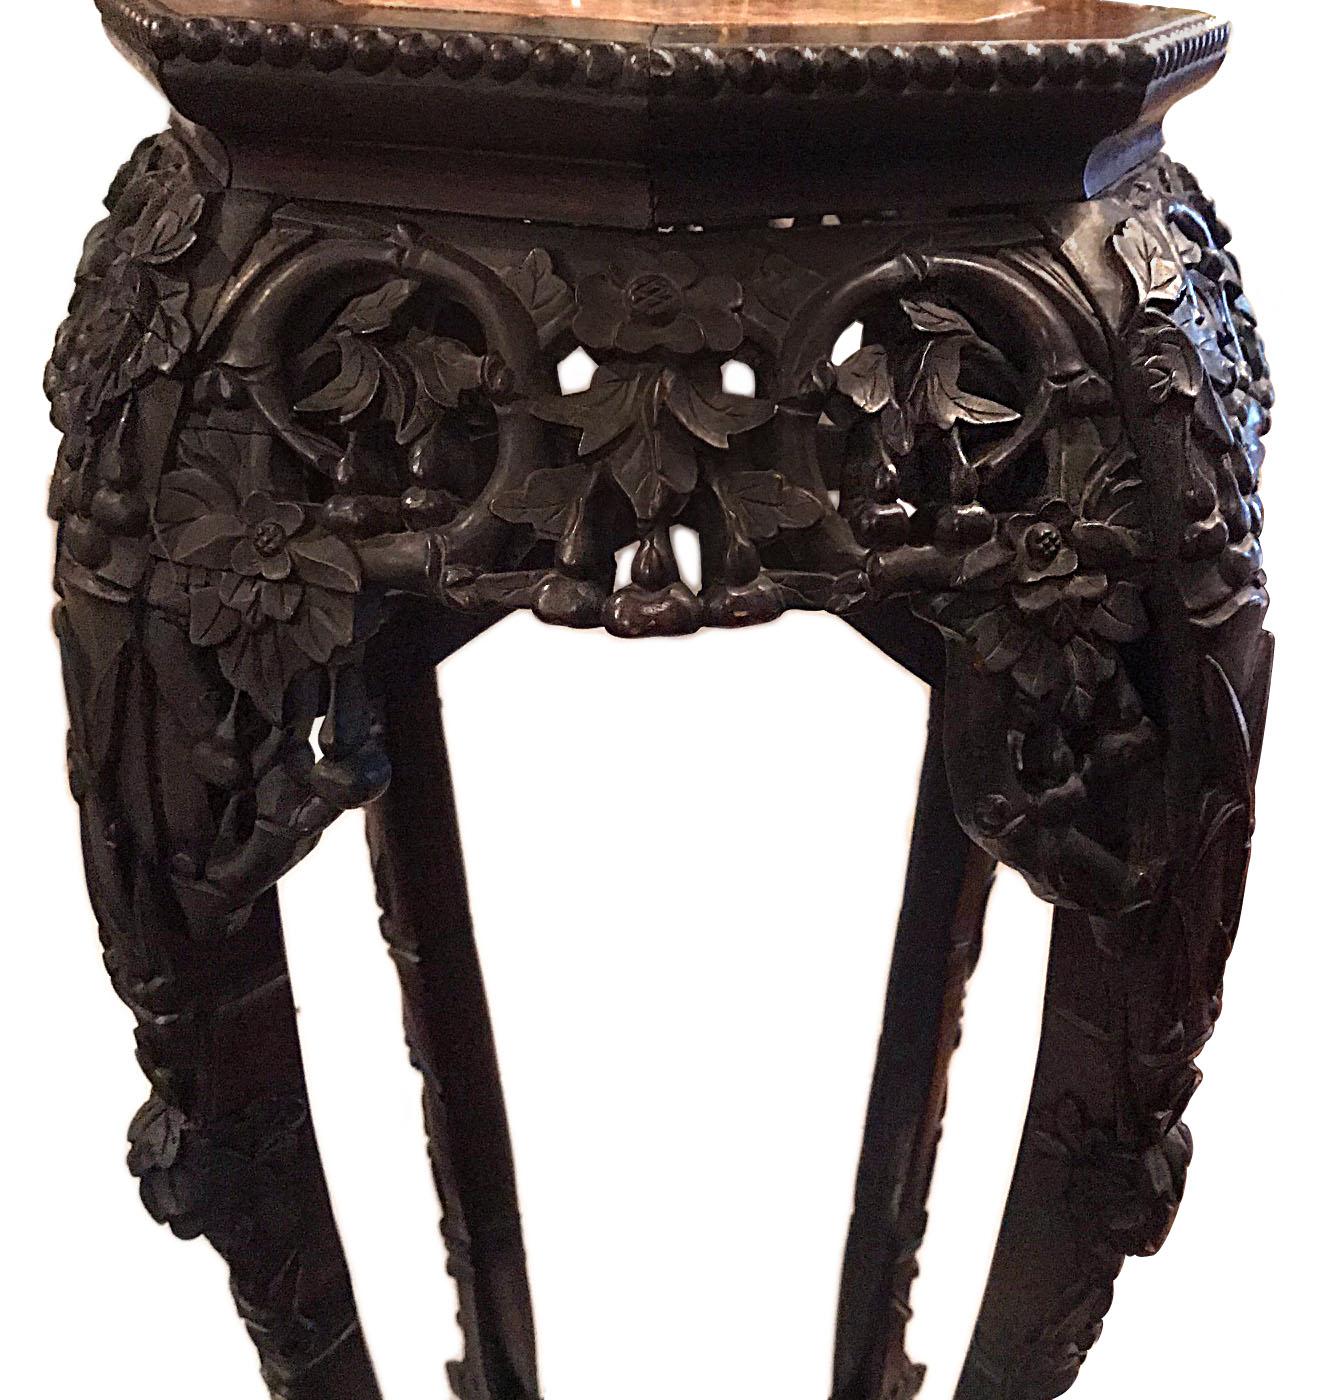 A 19th century Chinese carved wood stand with rose marble top.

Measurements:
Height 37.5